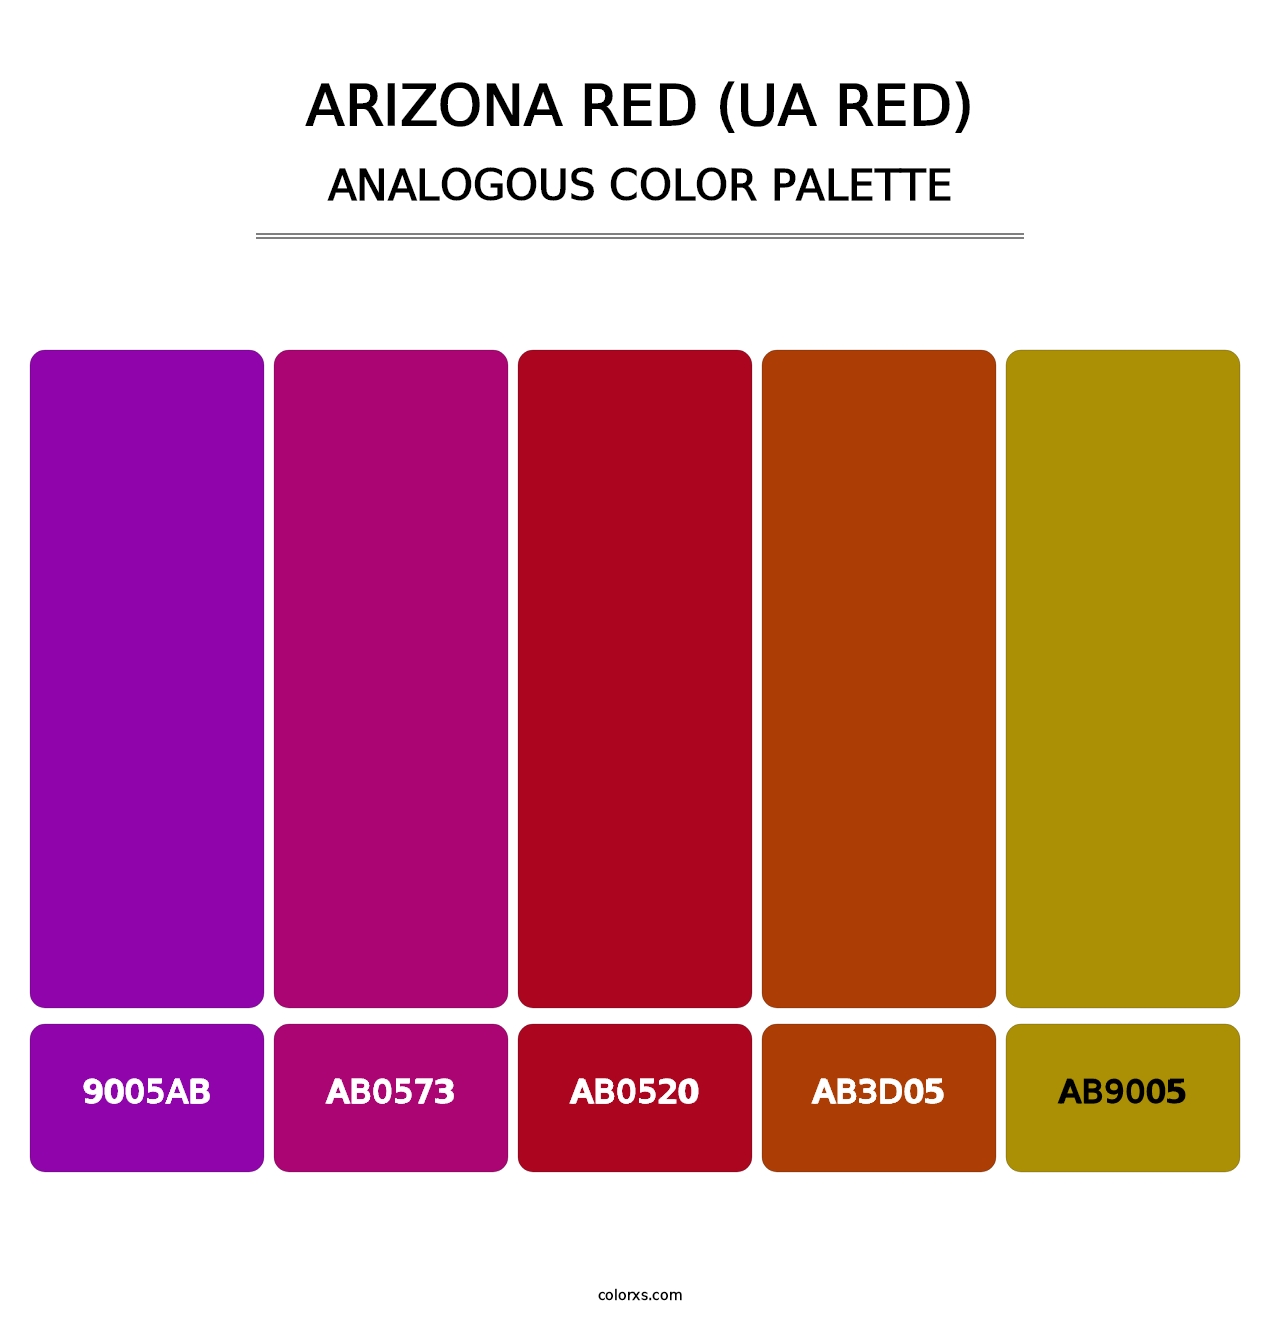 Arizona Red (UA Red) - Analogous Color Palette